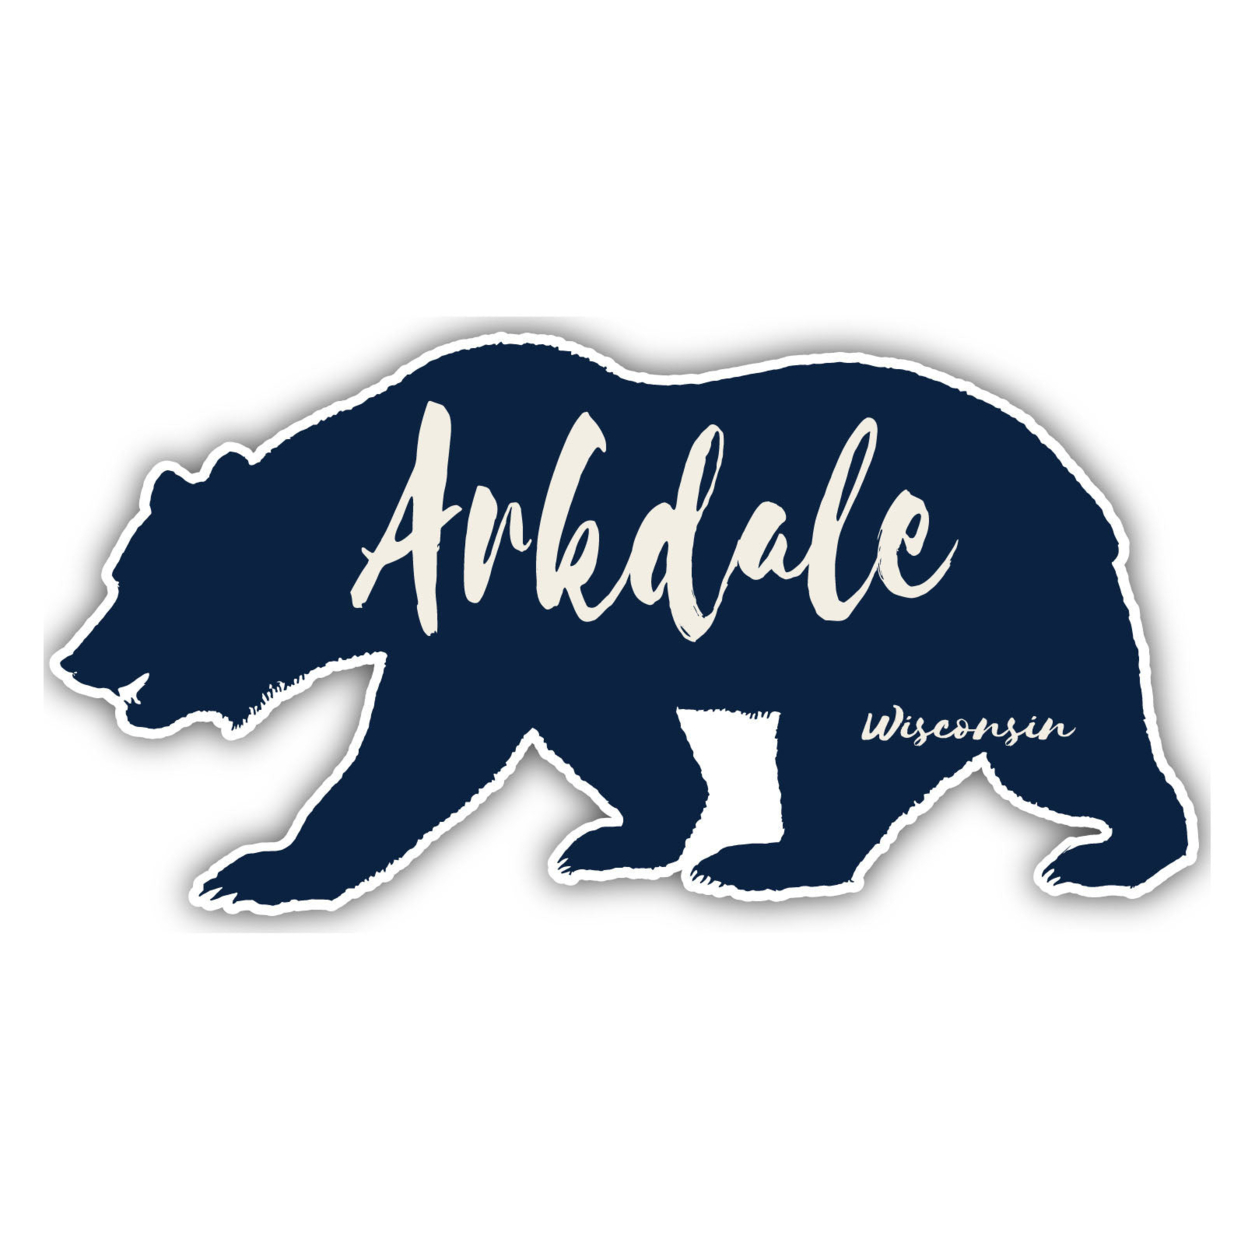 Arkdale Wisconsin Souvenir Decorative Stickers (Choose Theme And Size) - Single Unit, 8-Inch, Adventures Awaits